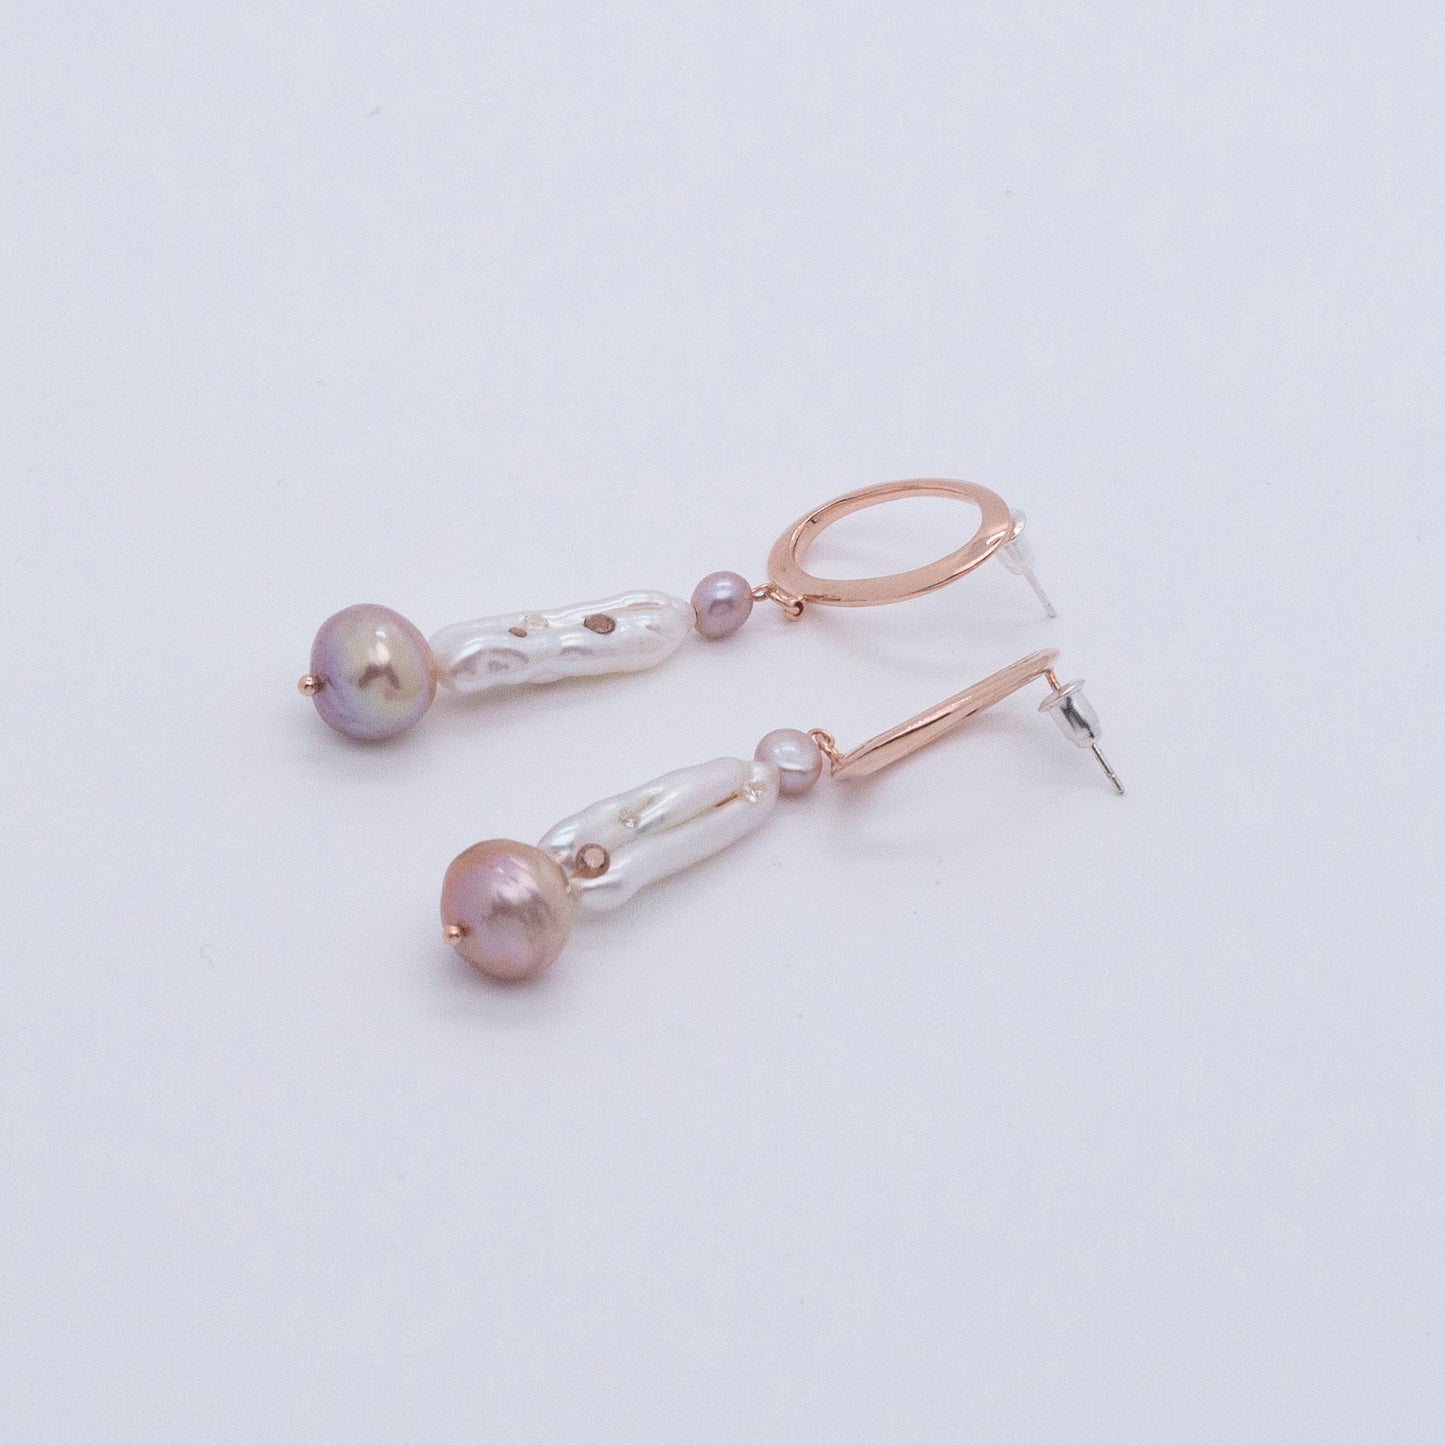 Multiverse - Baroque Pearl Drop Earrings (Rose Gold Plated)